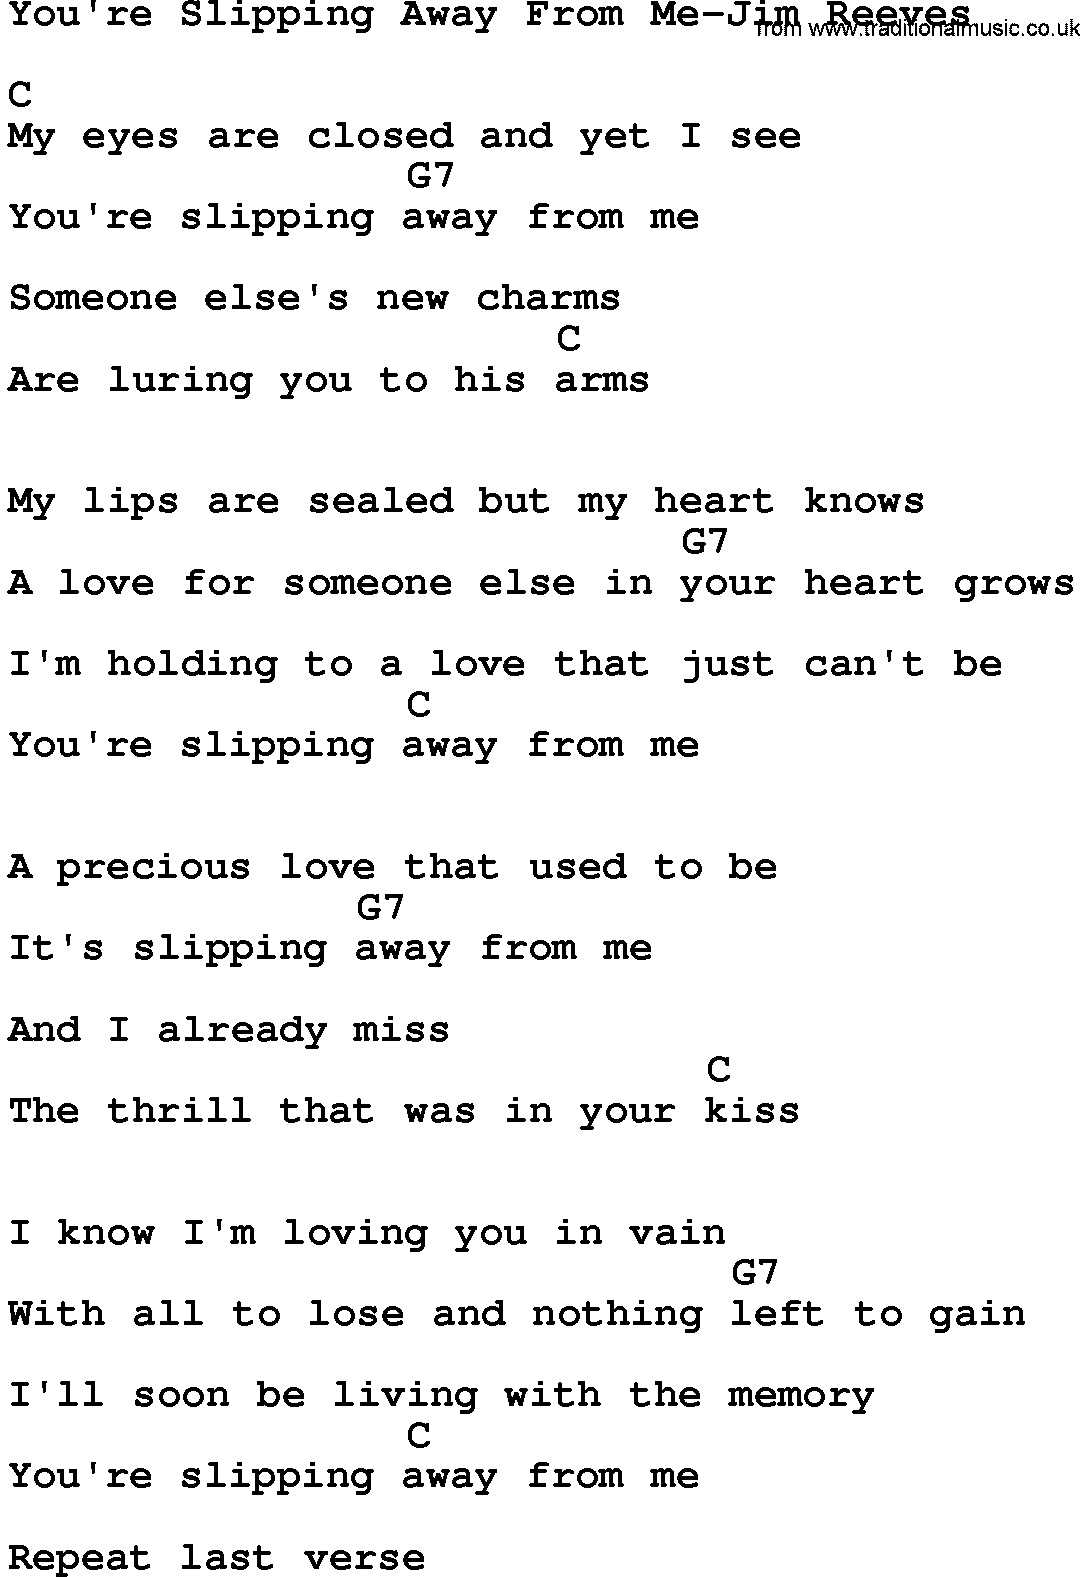 Country music song: You're Slipping Away From Me-Jim Reeves lyrics and chords